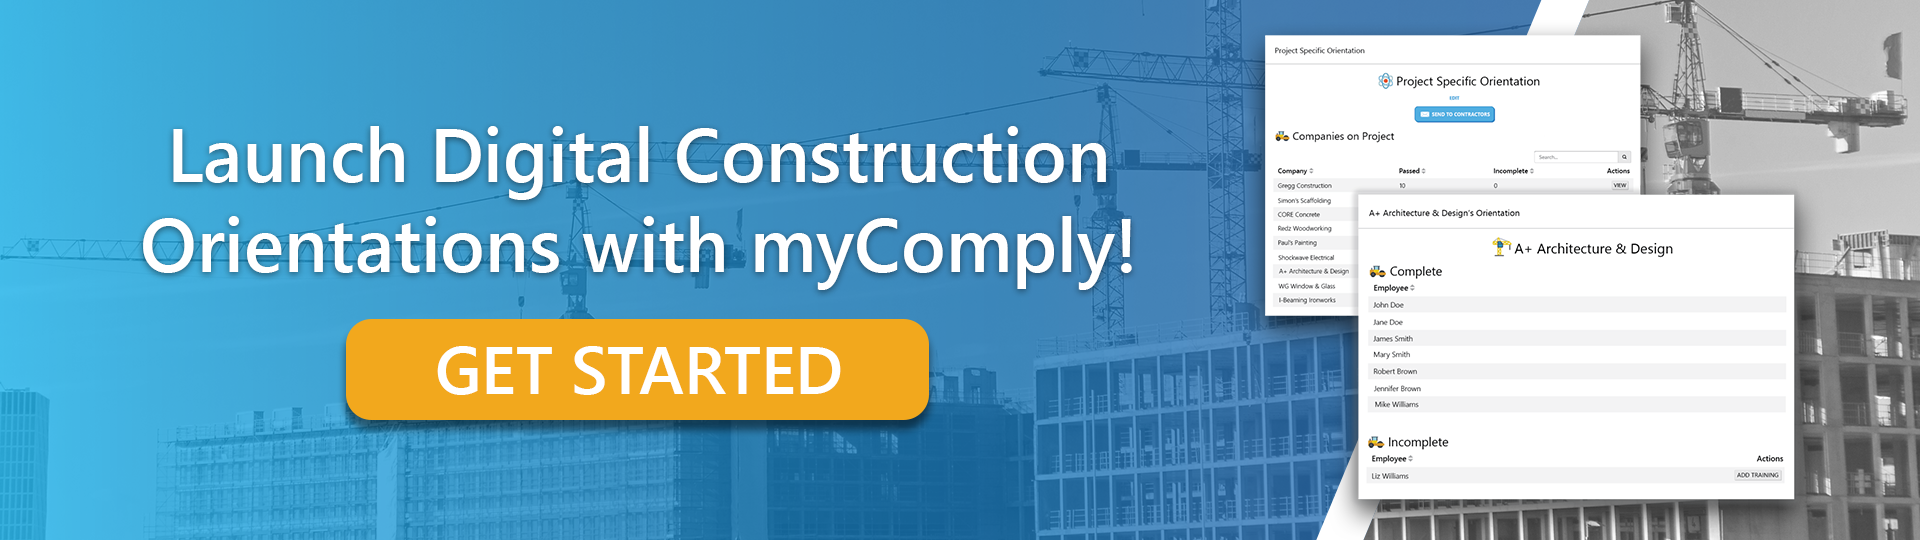 Launch Digital Construction Orientations with myComply